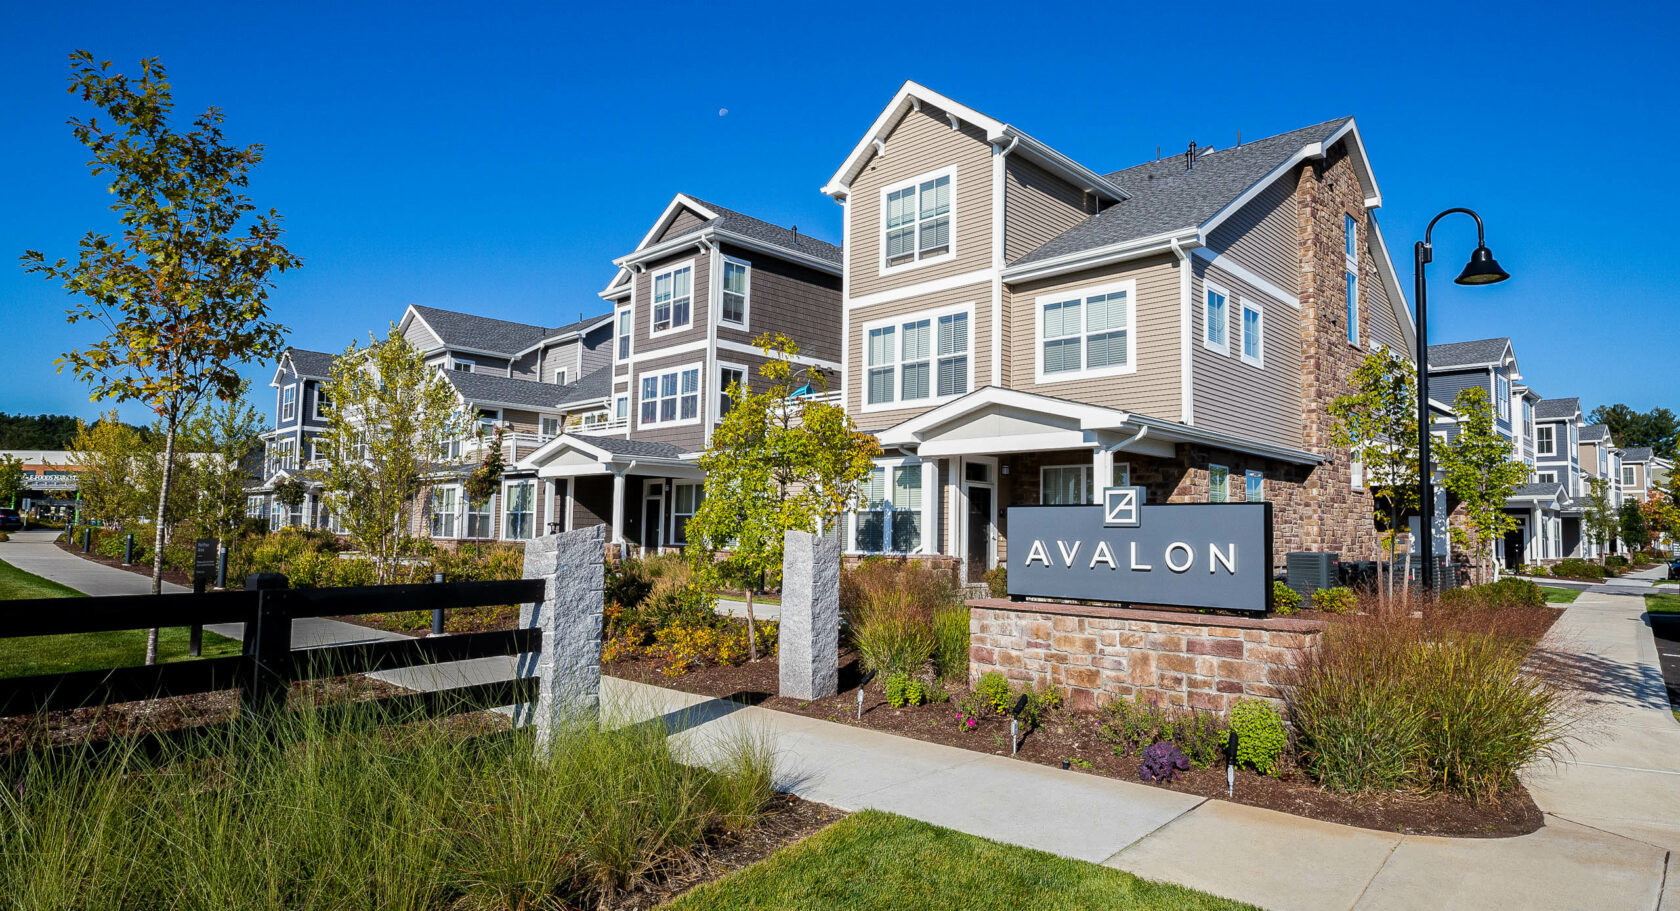 Avalon sign with plants around it.